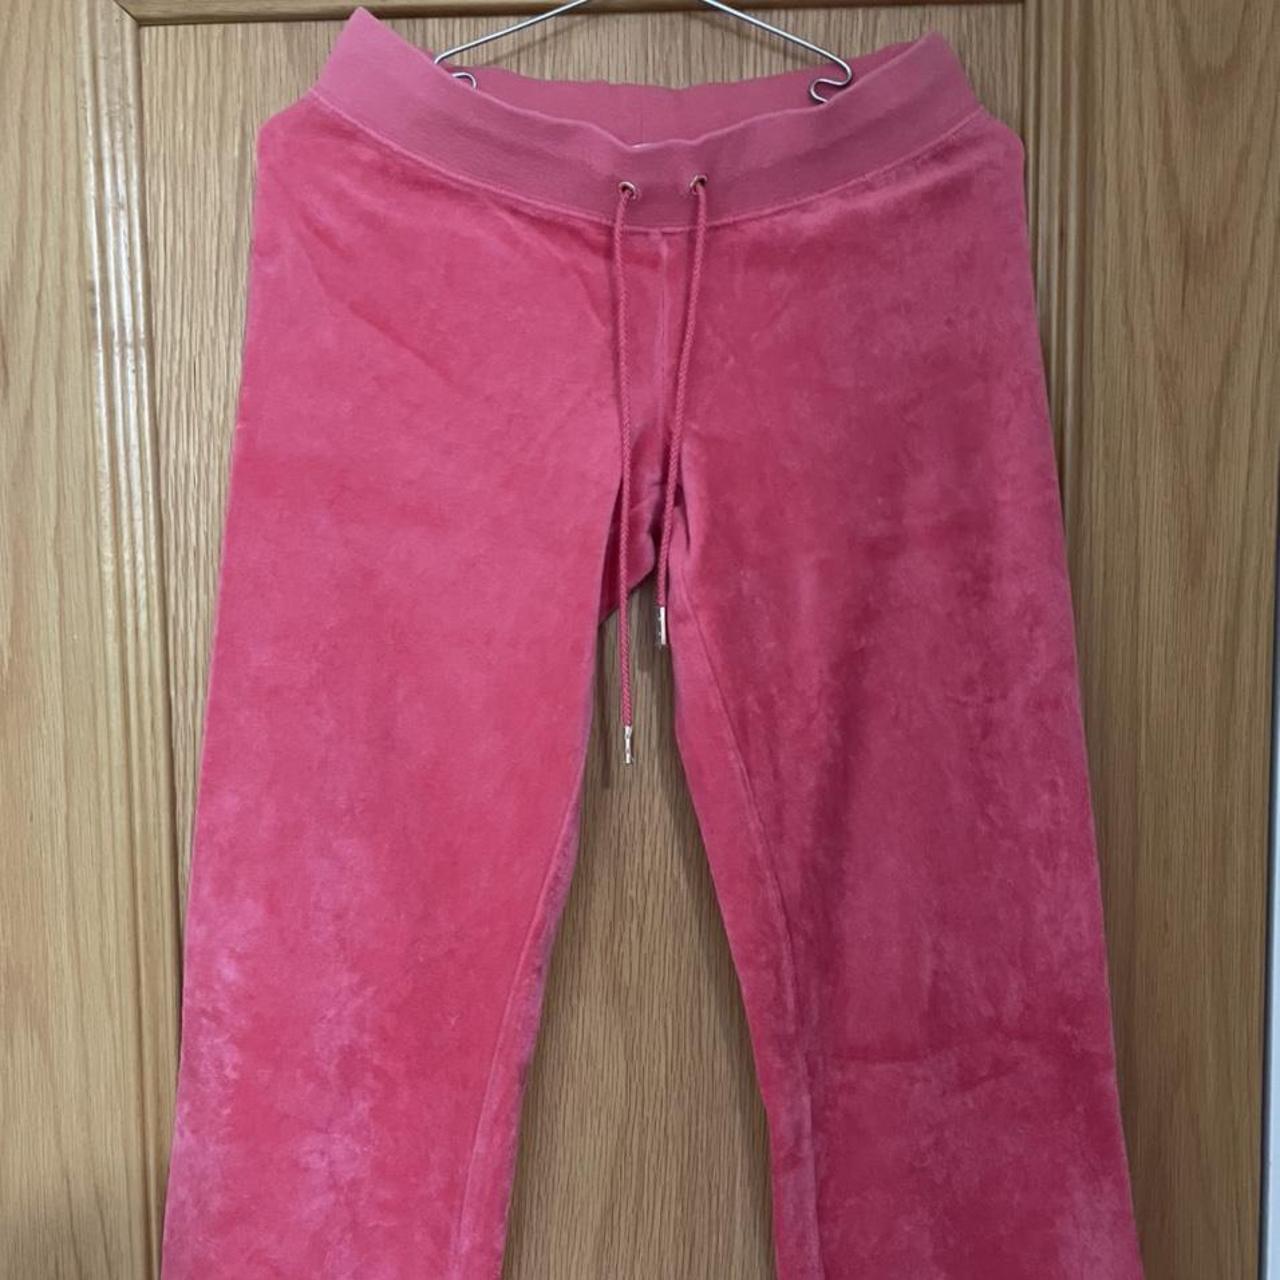 Pink Juicy Couture flares Please message before... - Depop